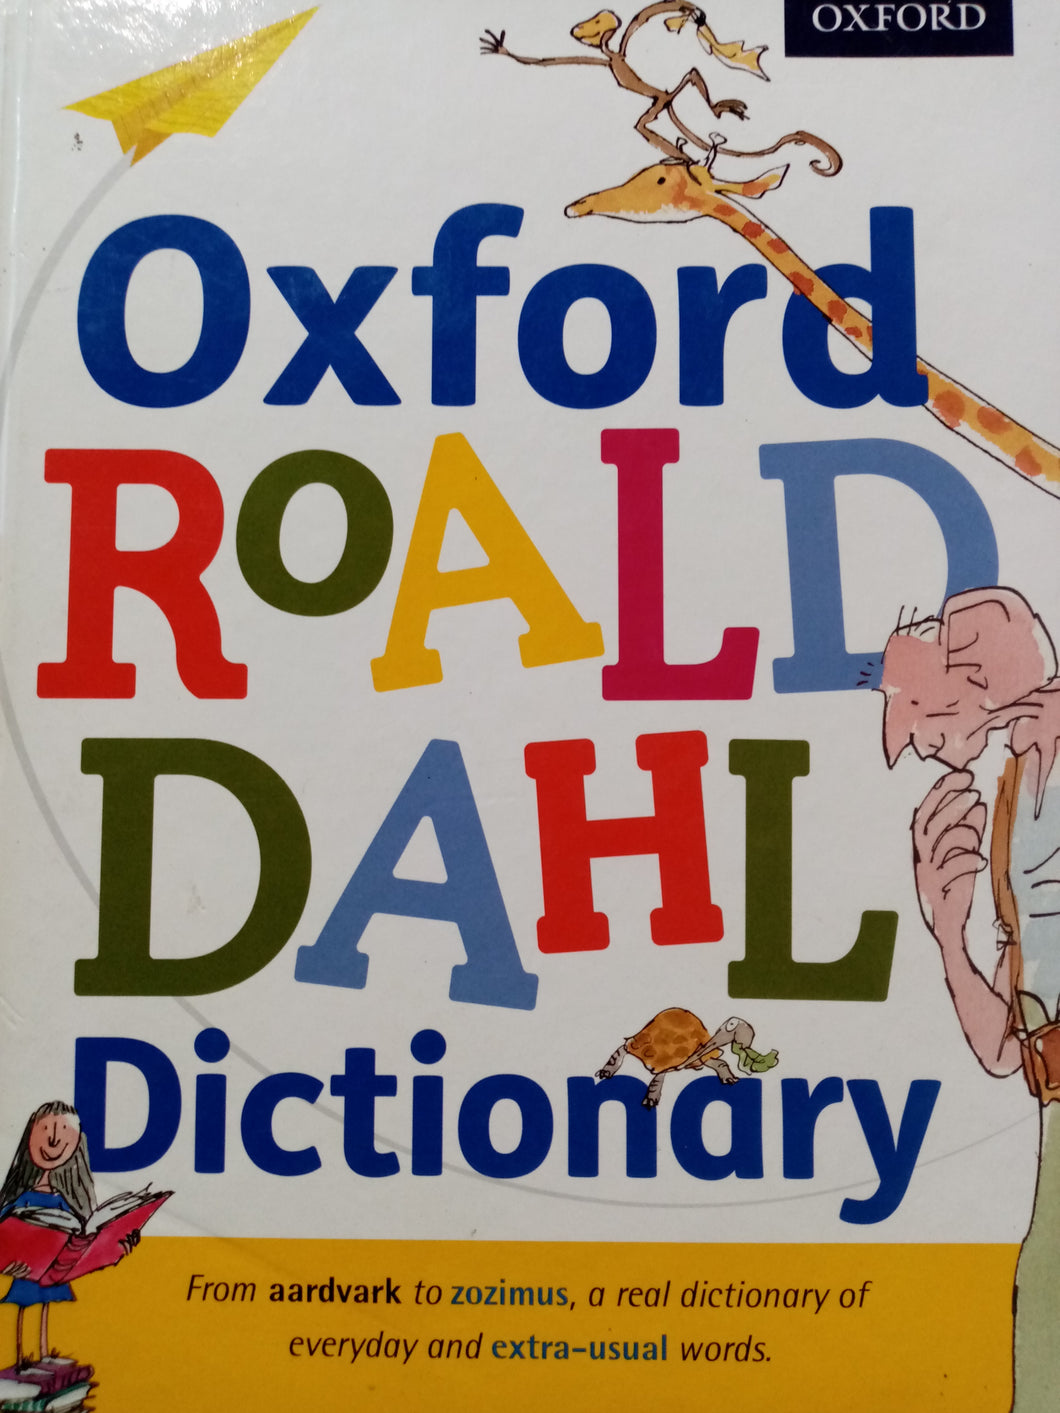 Dictionary by Oxford Roald Dahl